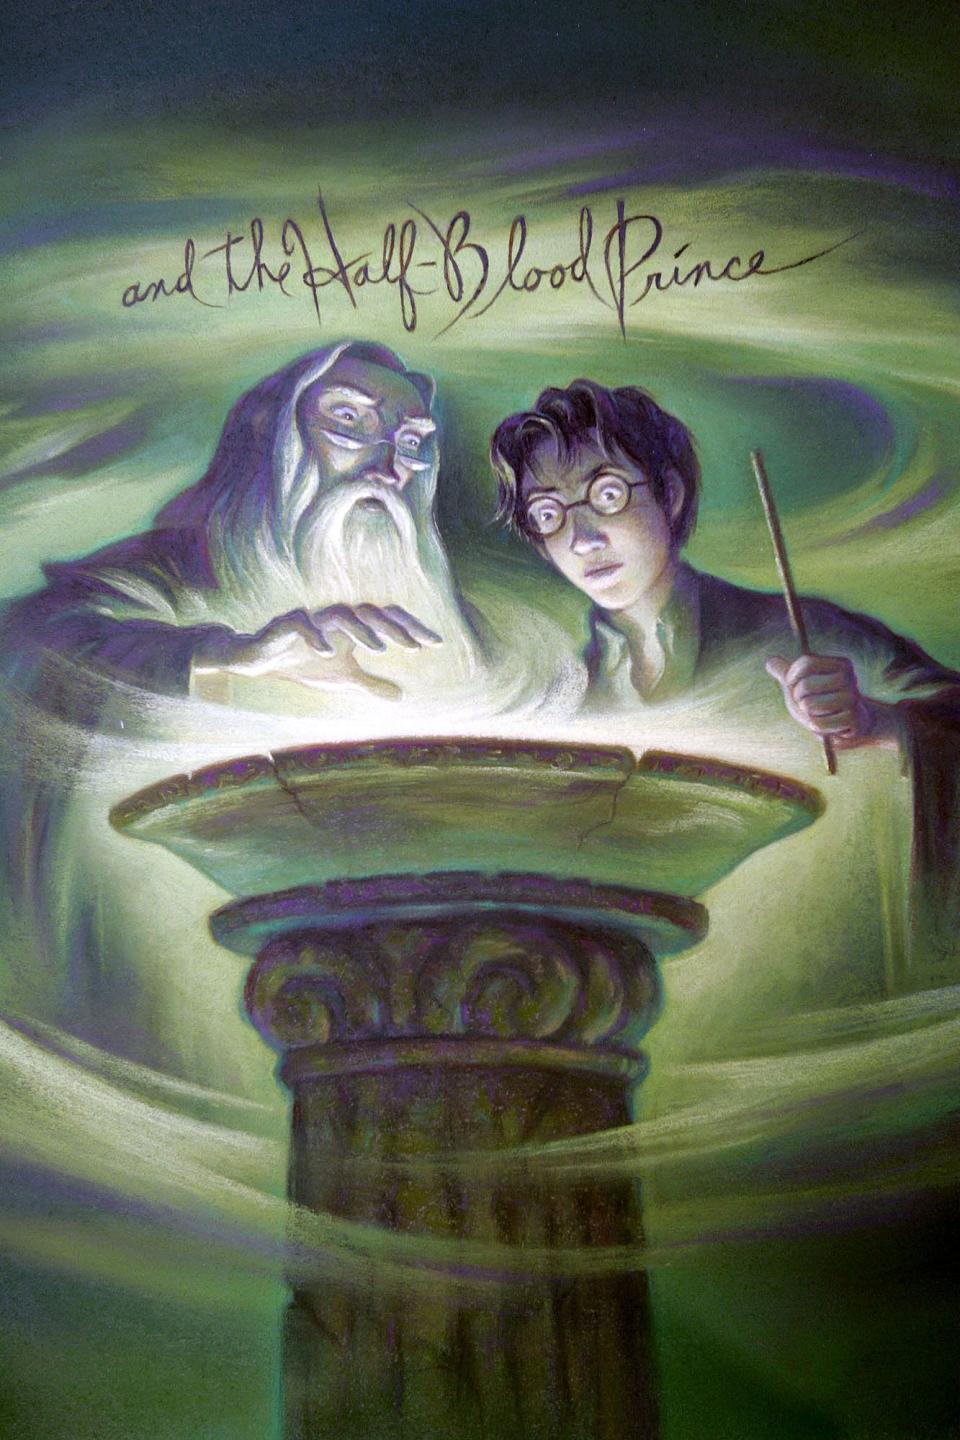 Cover work by Sarasota artist Mary GrandPré for “Harry Potter and the Half-Blood Prince.”